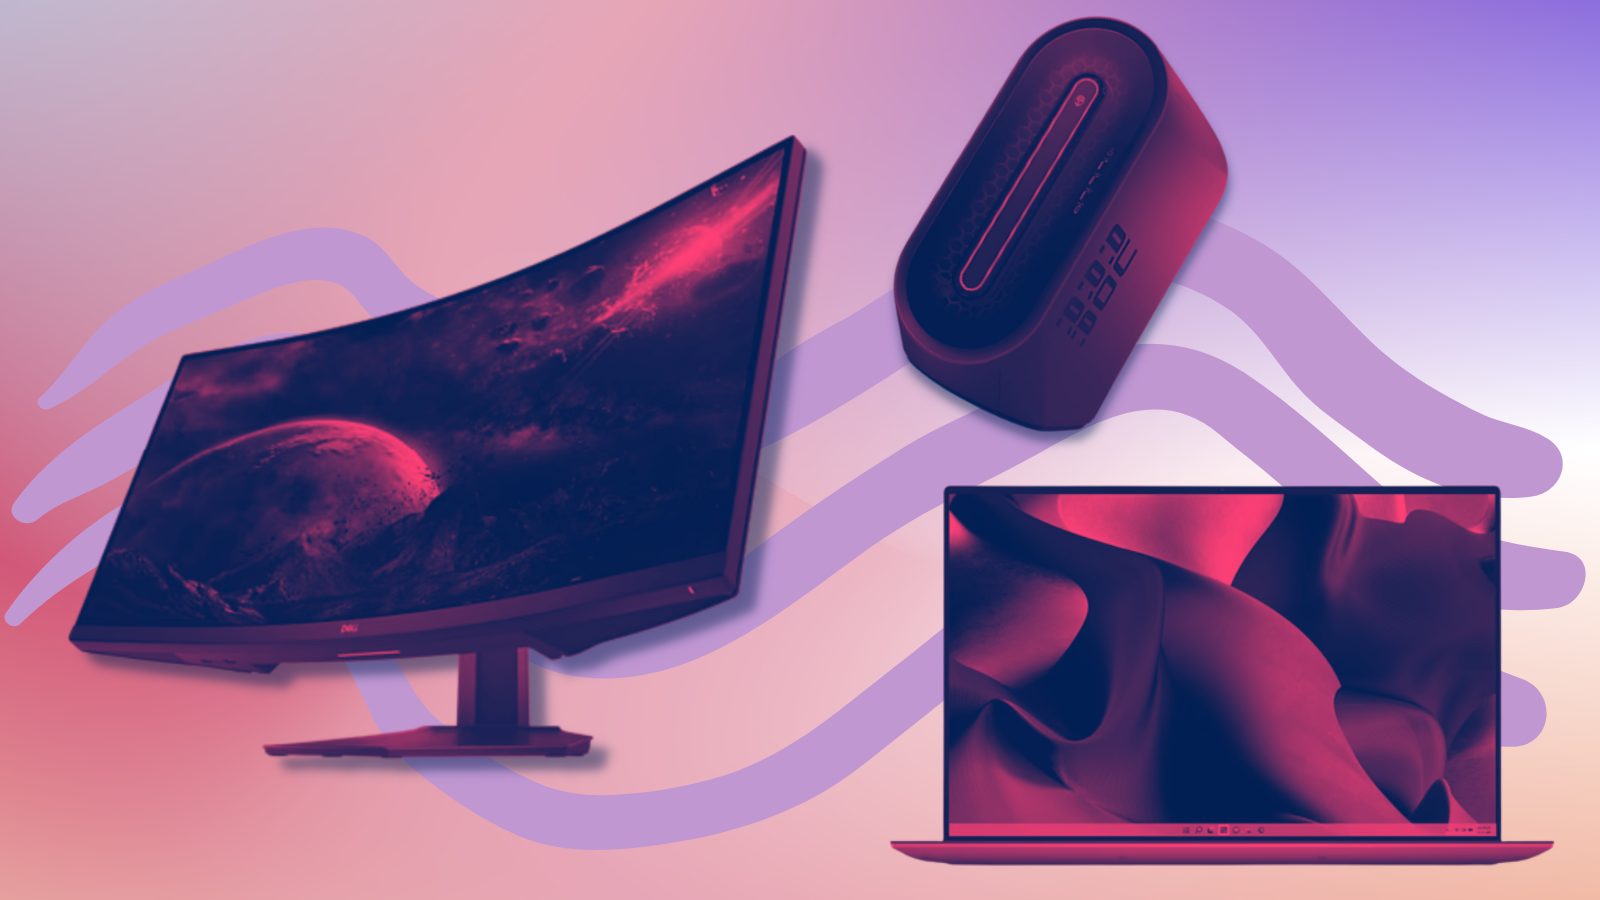 dell xps laptop, S3422DWG gaming monitor, and Alienware Aurora R13 gaming desktop with pink tint and colorful background